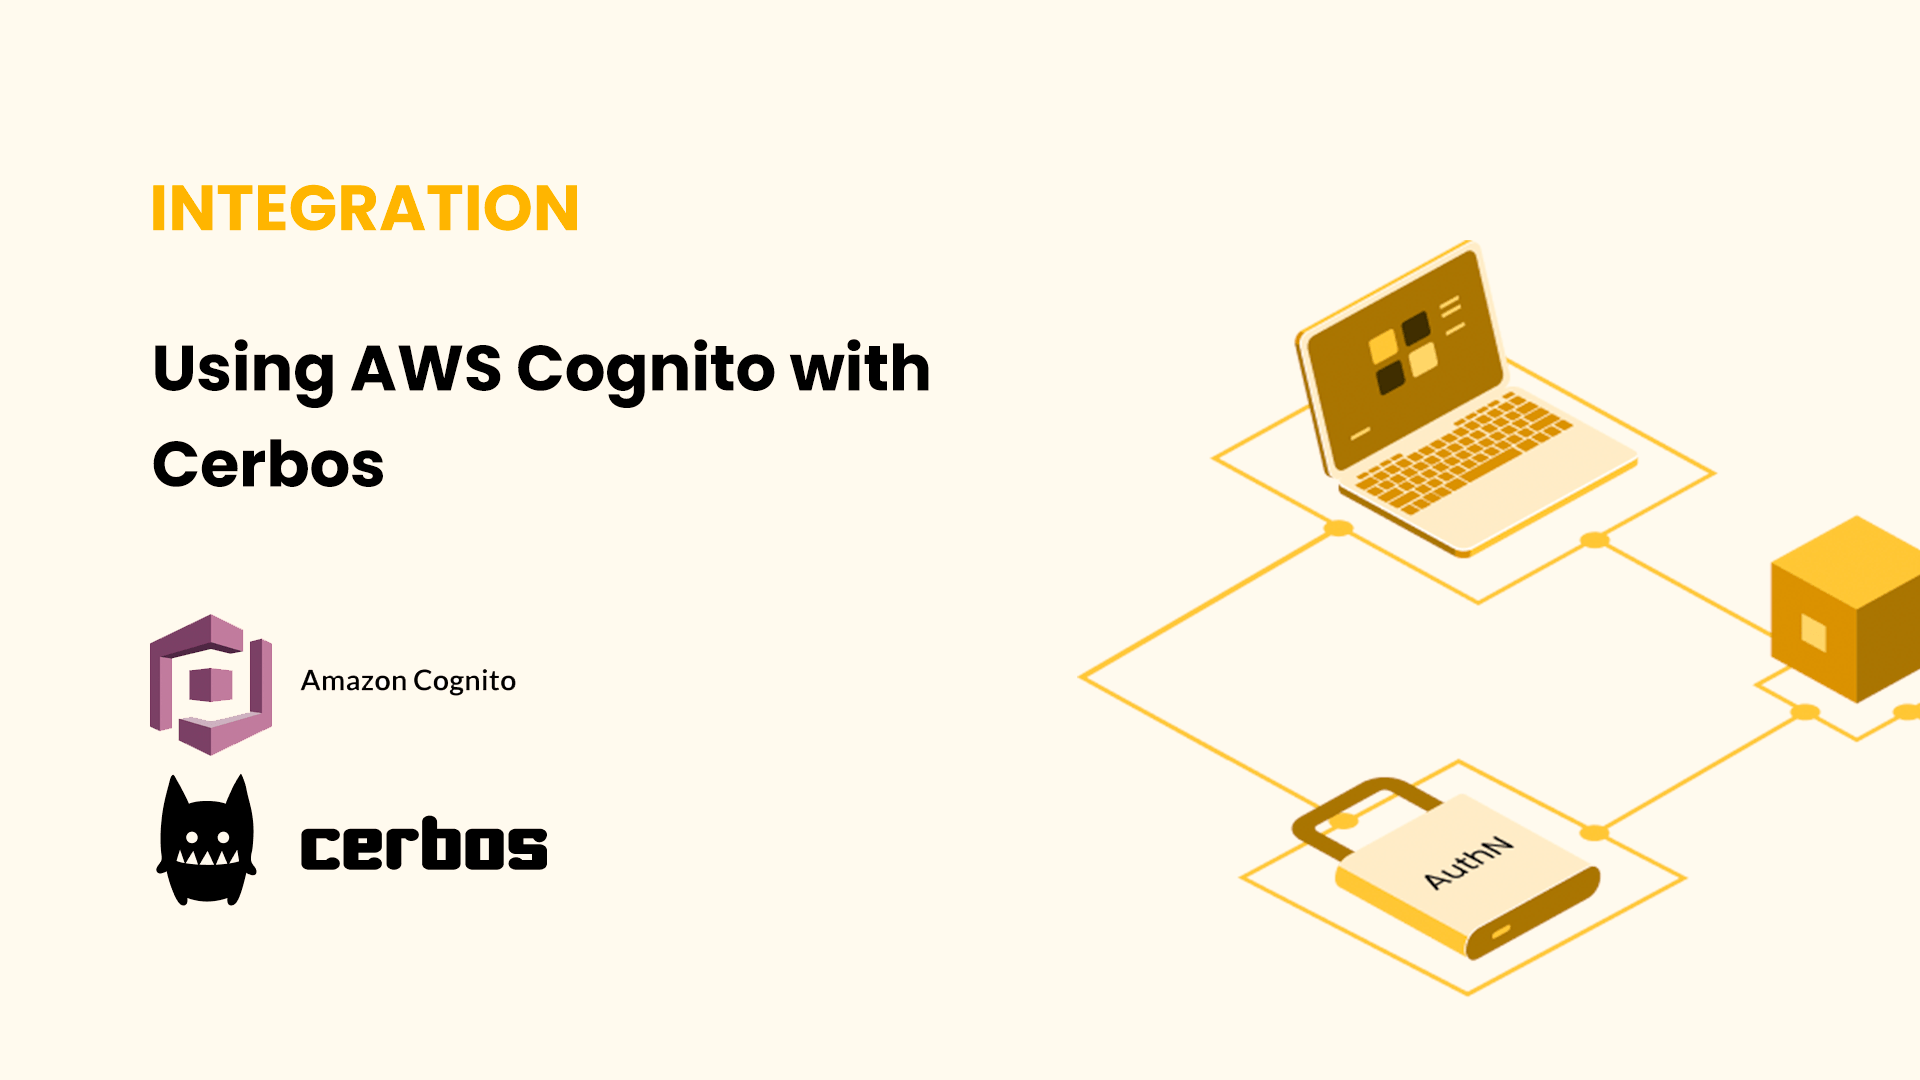 Using AWS Cognito with Cerbos